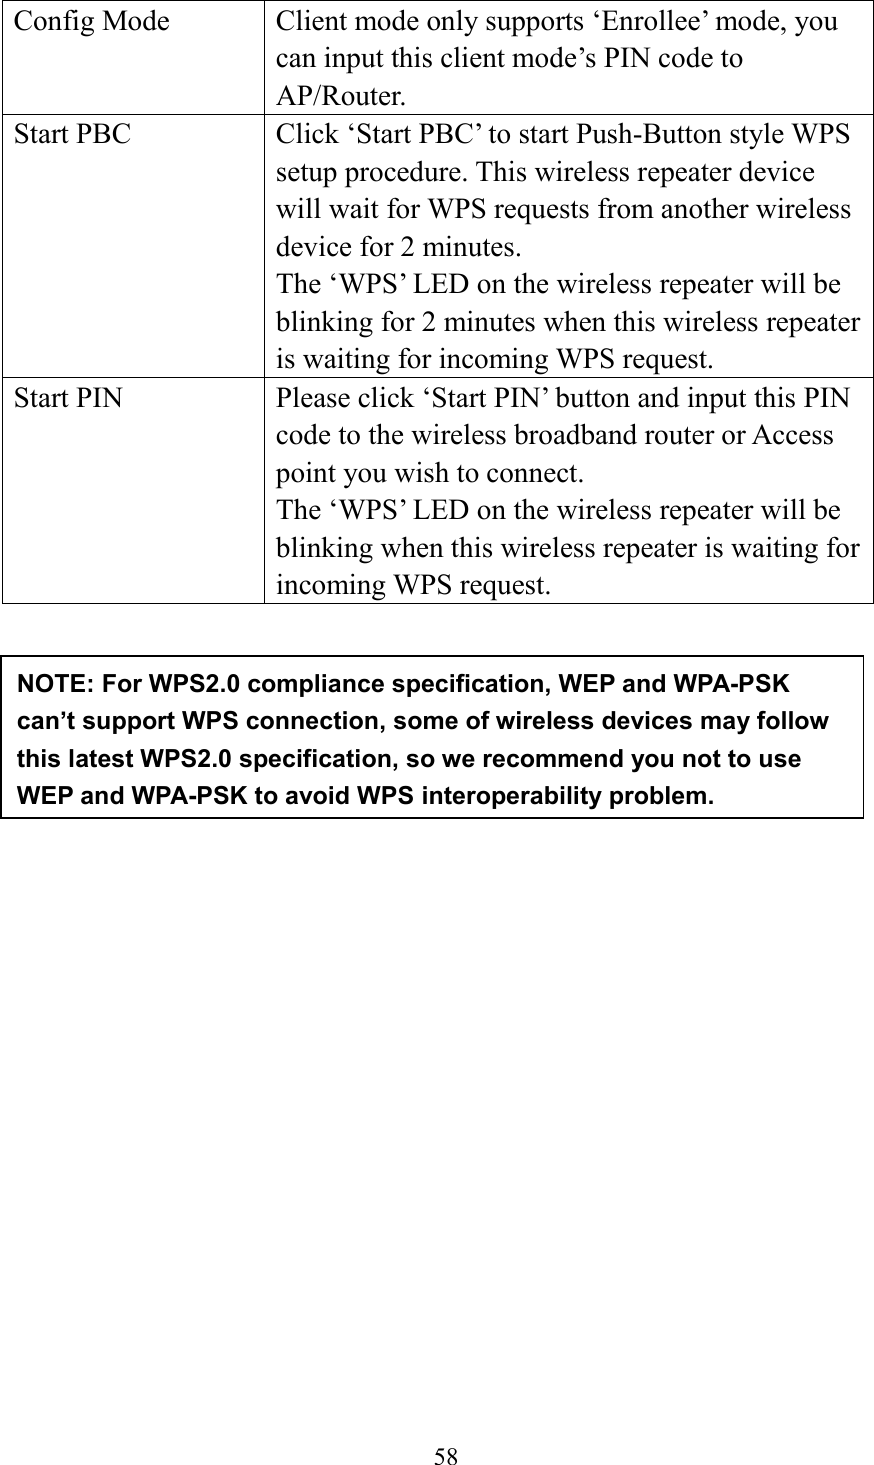  58  Config Mode Client mode only supports ‘Enrollee’ mode, you can input this client mode’s PIN code to AP/Router. Start PBC Click ‘Start PBC’ to start Push-Button style WPS setup procedure. This wireless repeater device will wait for WPS requests from another wireless device for 2 minutes. The ‘WPS’ LED on the wireless repeater will be blinking for 2 minutes when this wireless repeater is waiting for incoming WPS request. Start PIN Please click ‘Start PIN’ button and input this PIN code to the wireless broadband router or Access point you wish to connect. The ‘WPS’ LED on the wireless repeater will be blinking when this wireless repeater is waiting for incoming WPS request.            NOTE: For WPS2.0 compliance specification, WEP and WPA-PSK can’t support WPS connection, some of wireless devices may follow this latest WPS2.0 specification, so we recommend you not to use WEP and WPA-PSK to avoid WPS interoperability problem.      